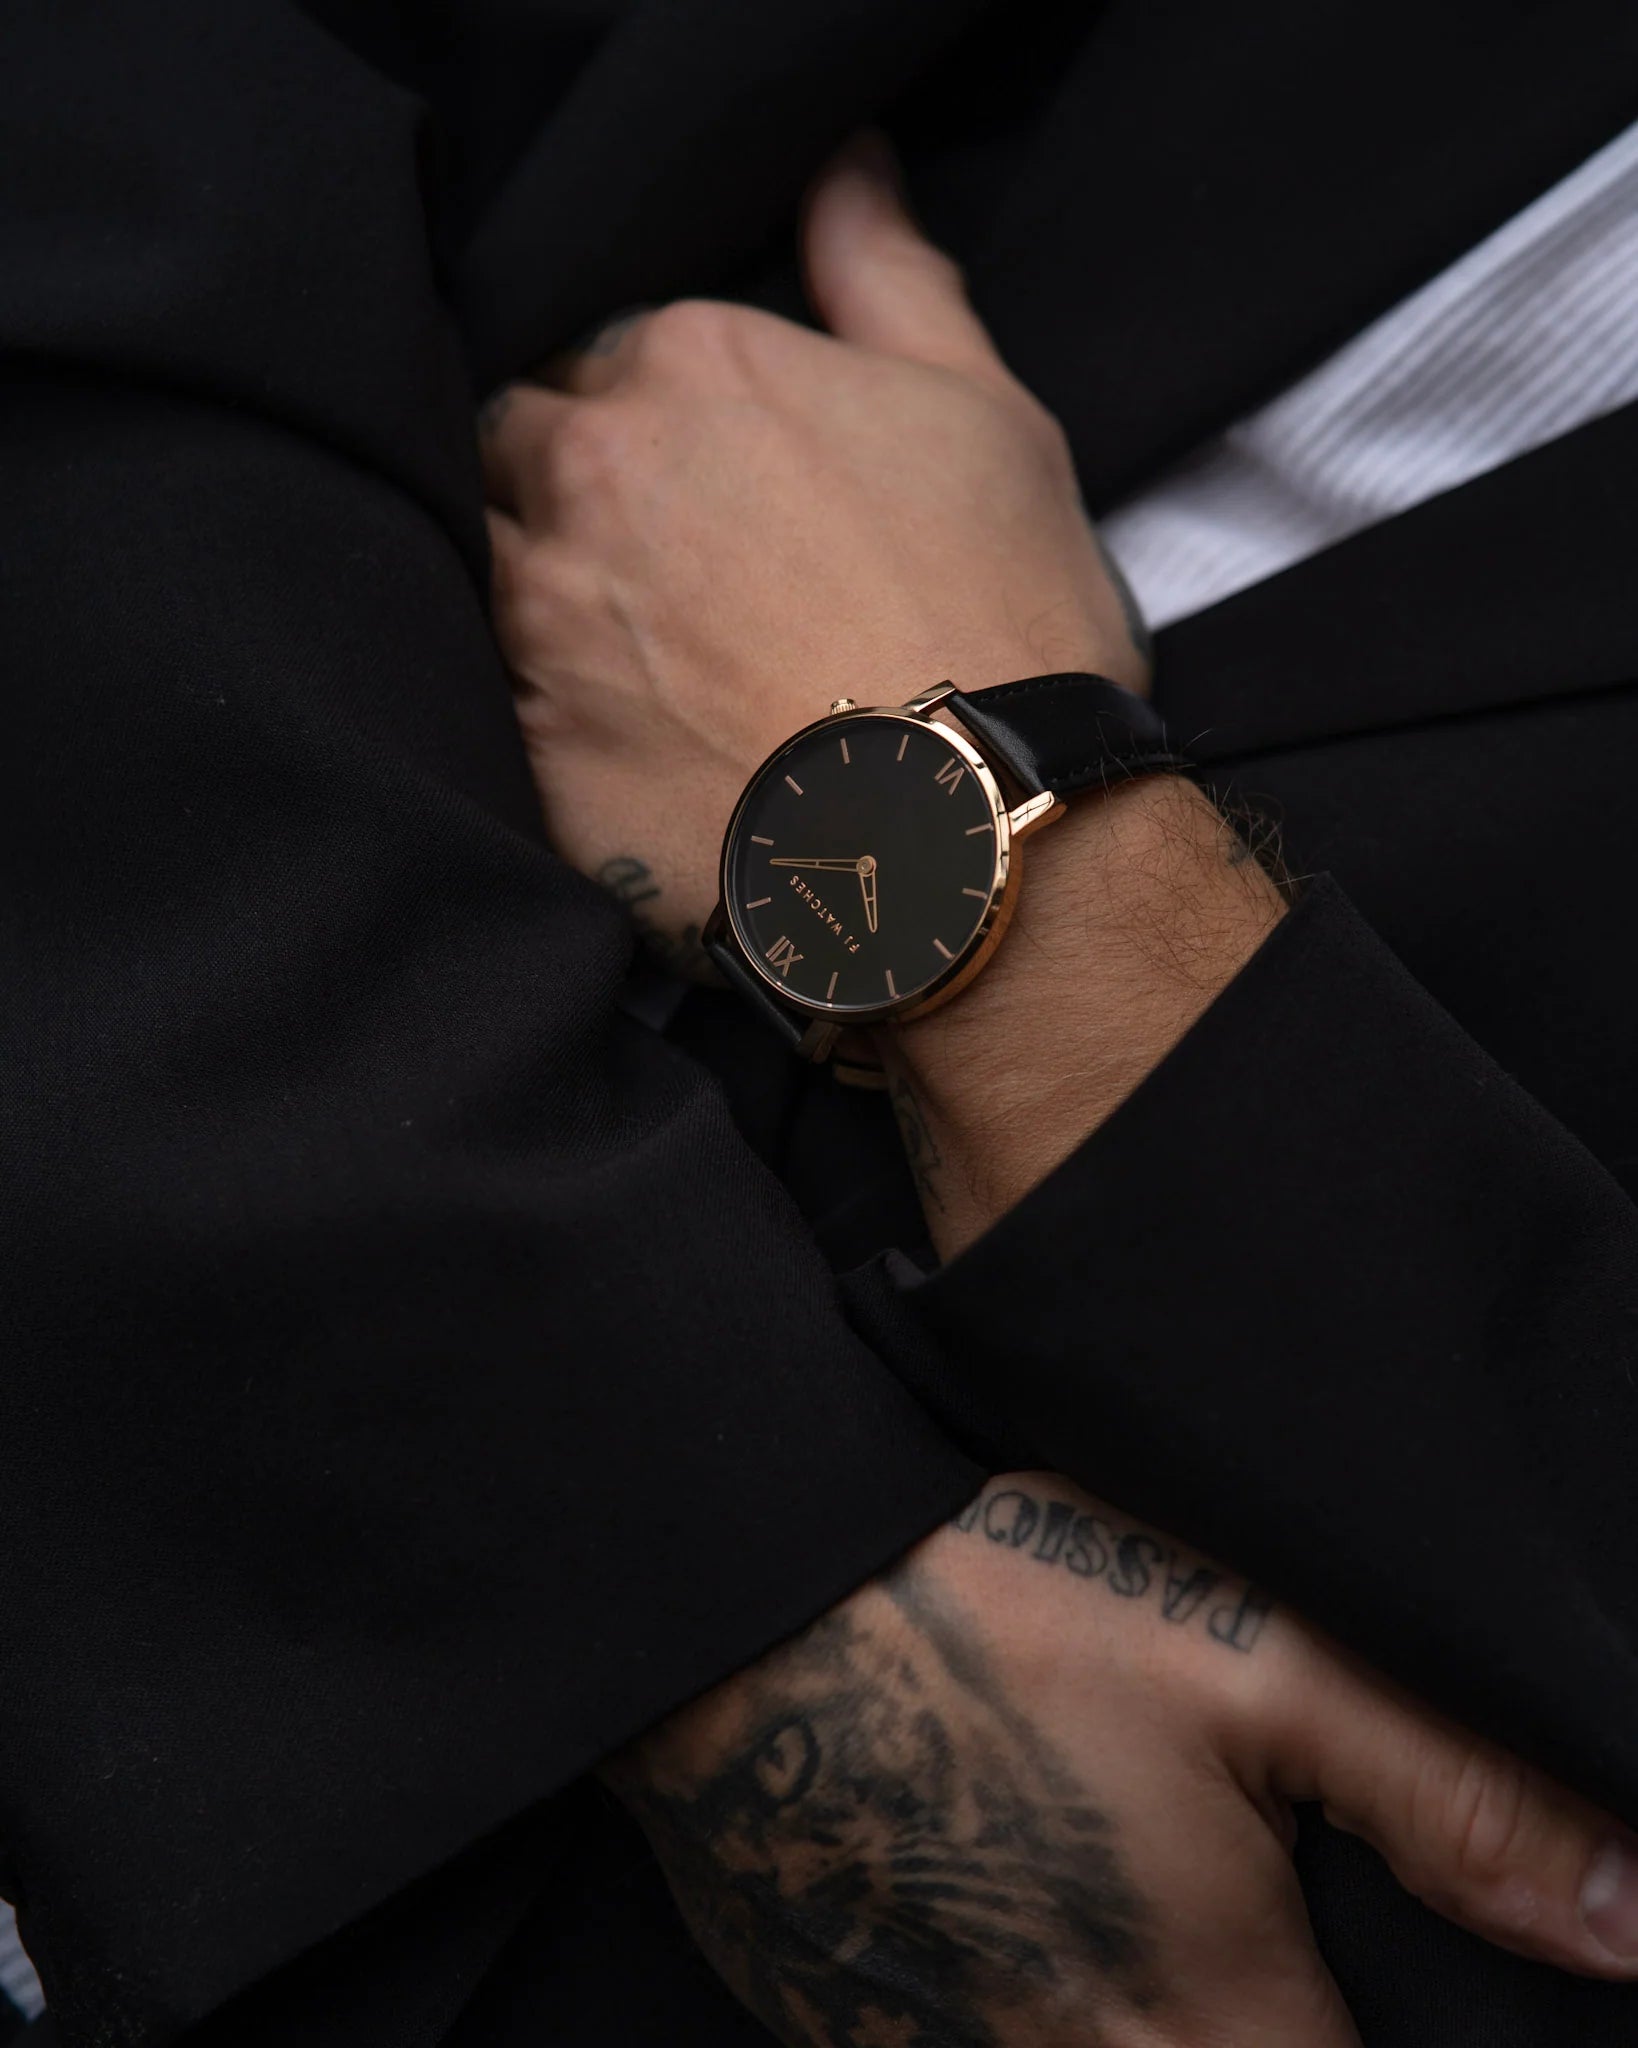 Discover the Golden Moon set, a 42mm men watch from Five Jwlry. Equipped with a minimalist black and rose gold dial. In this special edition, this watch comes with two leathers, one black leather and one brown. The perfect gift!